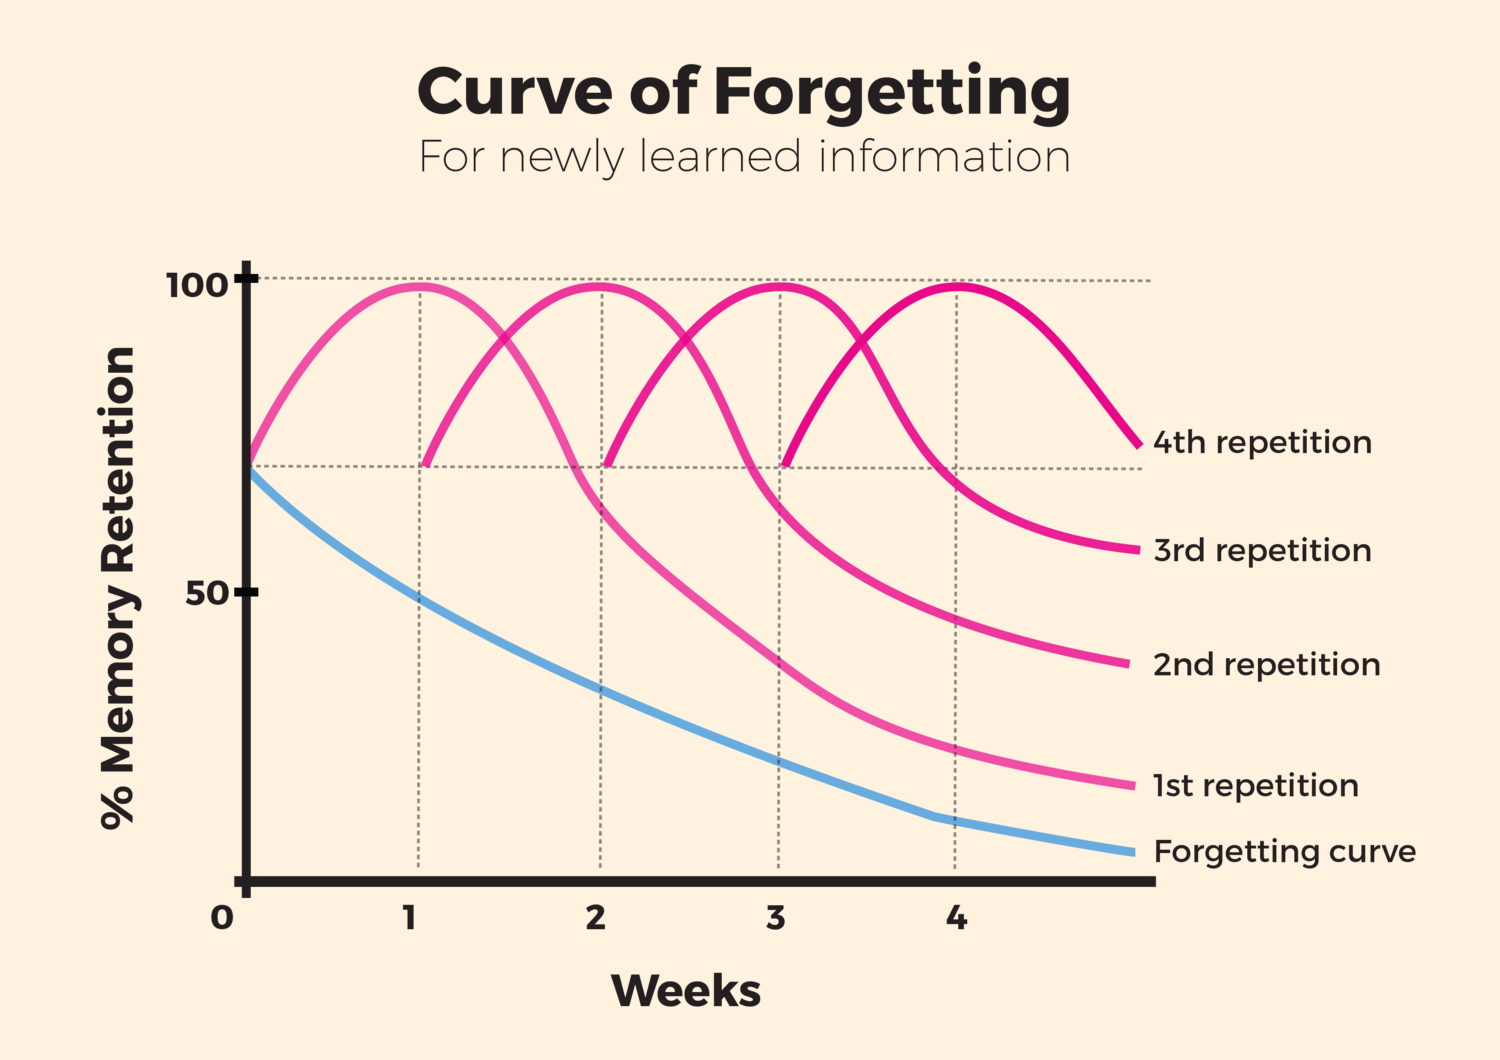 Curve of forgetting